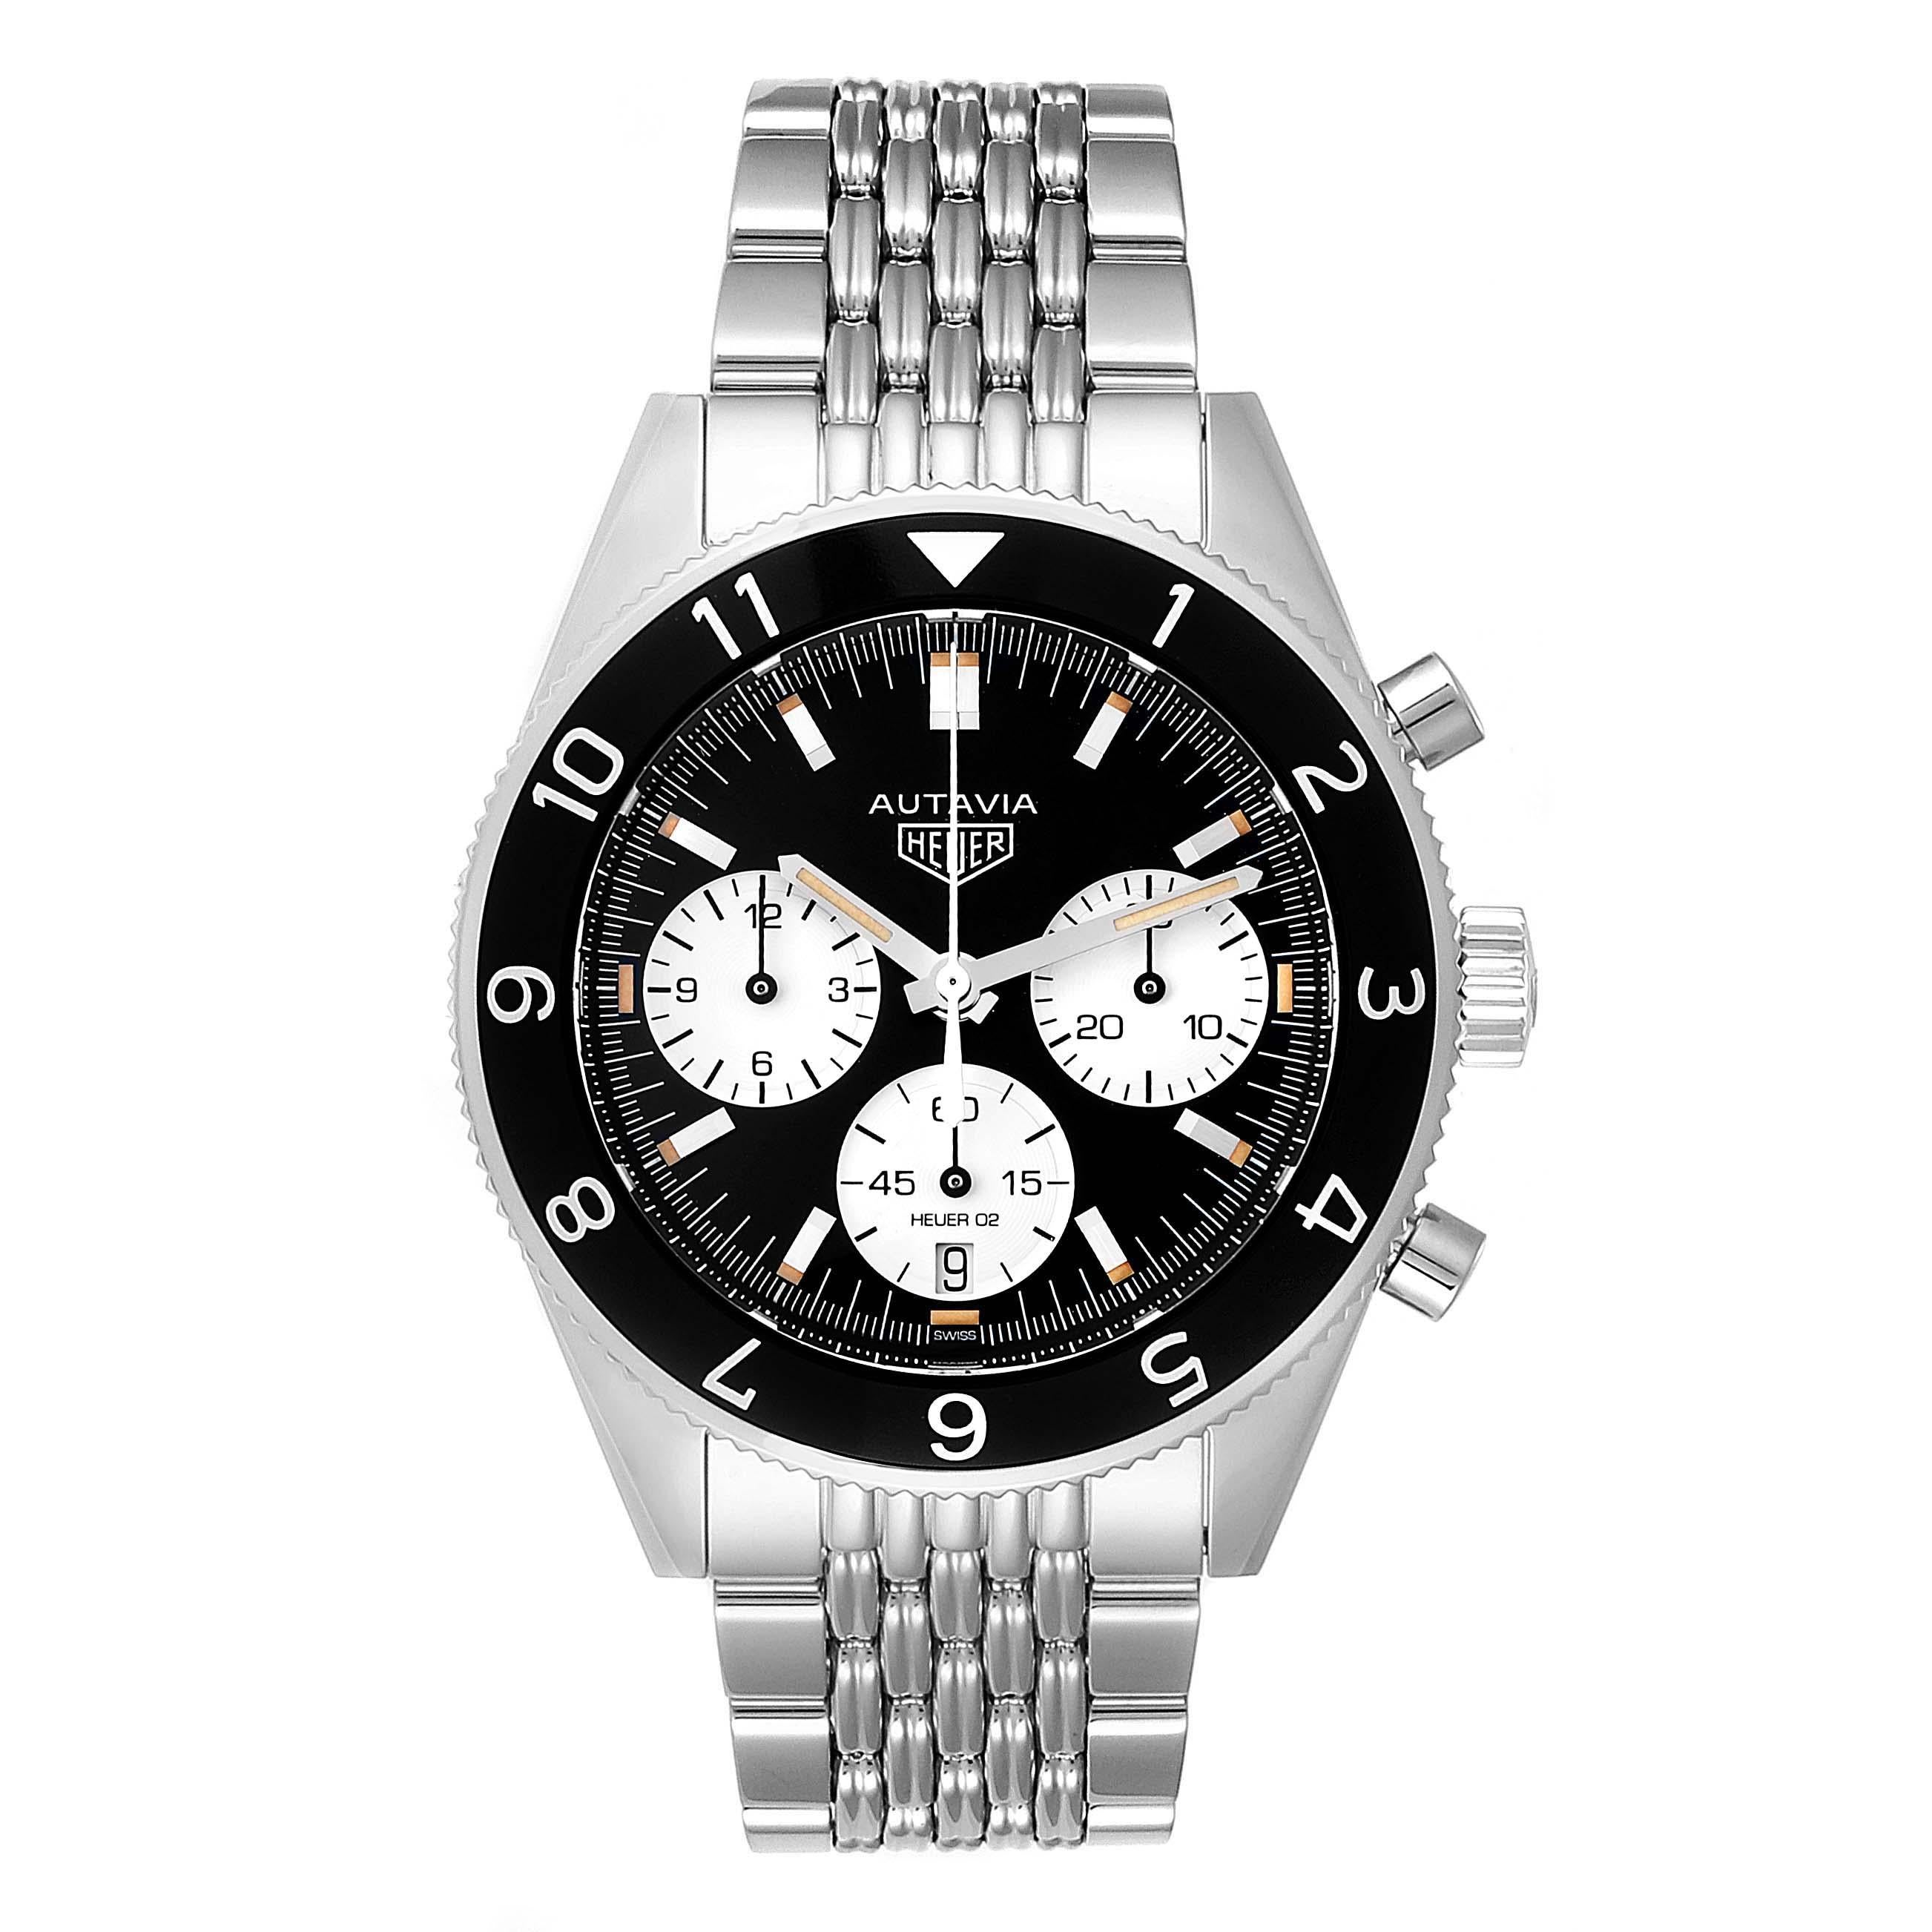 Tag Heuer Autavia Heritage Calibre Heuer 02 Steel Mens Watch CBE2110. Tag Heuer Caliber HEUER 02 automatic self-winding chronograph  movement. Stainless steel case 42 mm in diameter. Exhibition sapphire crystal case back. Black aluminum